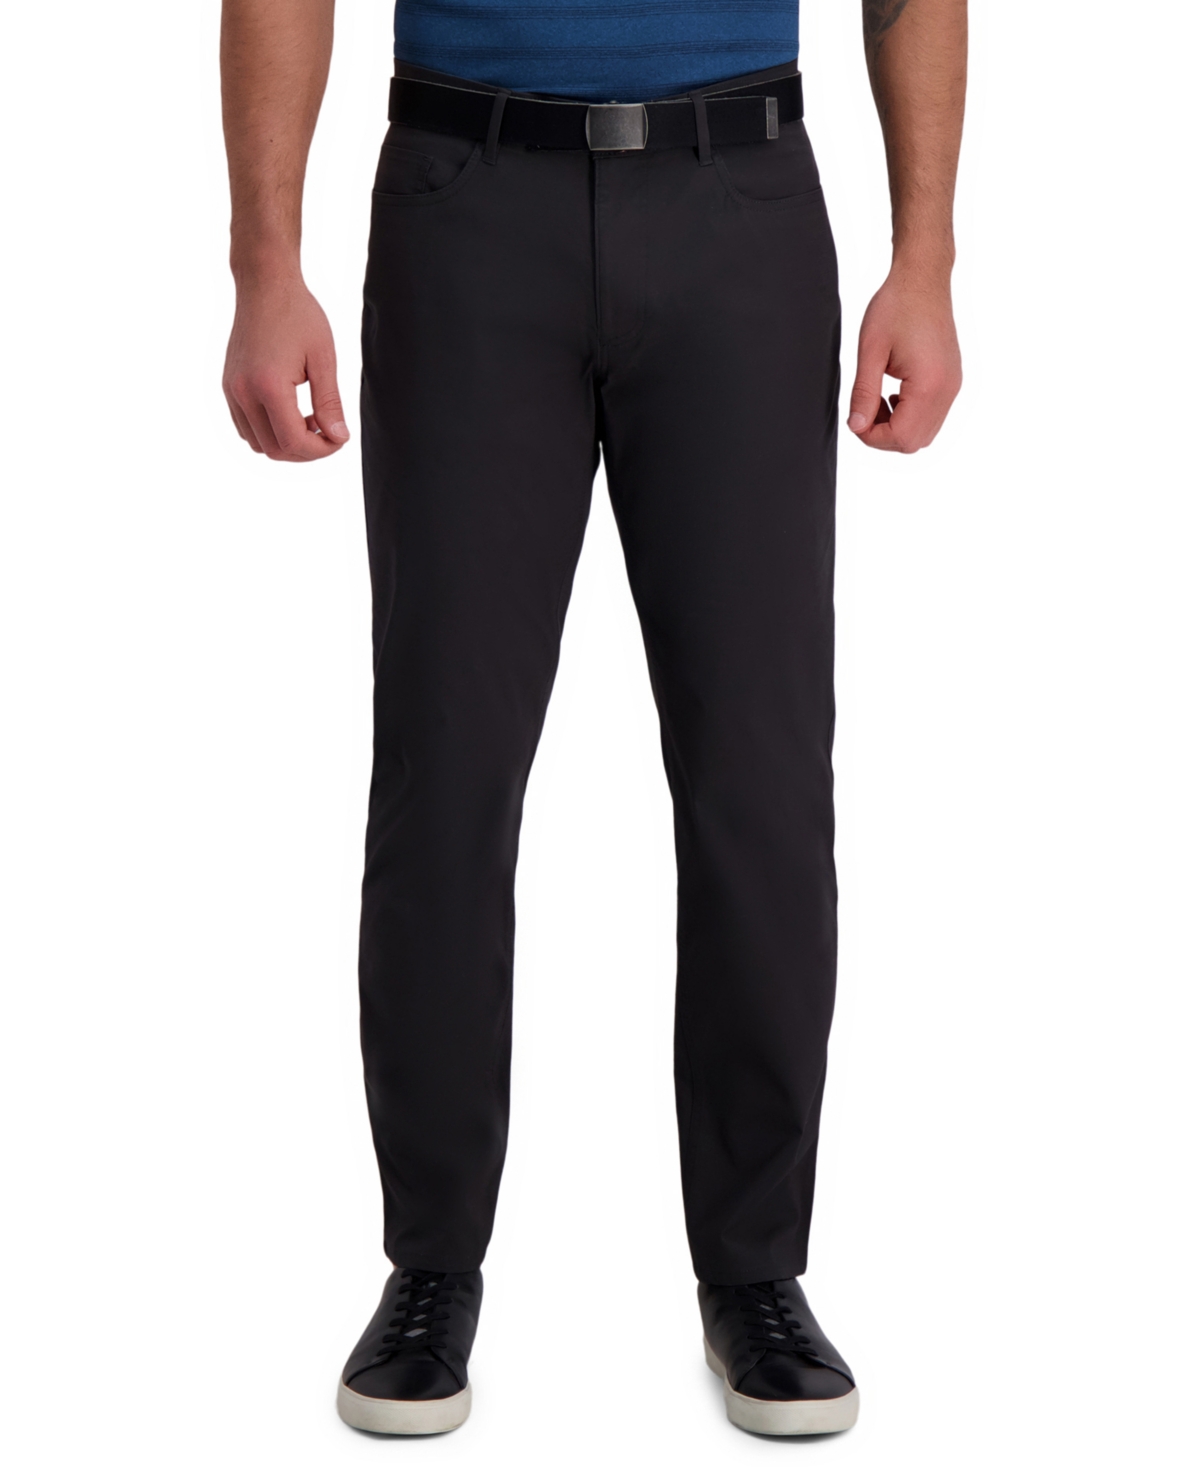 The Active Series City Flex Traveler Slim Fit Flat Front 5-Pocket Casual Pant (Ripstop) - String